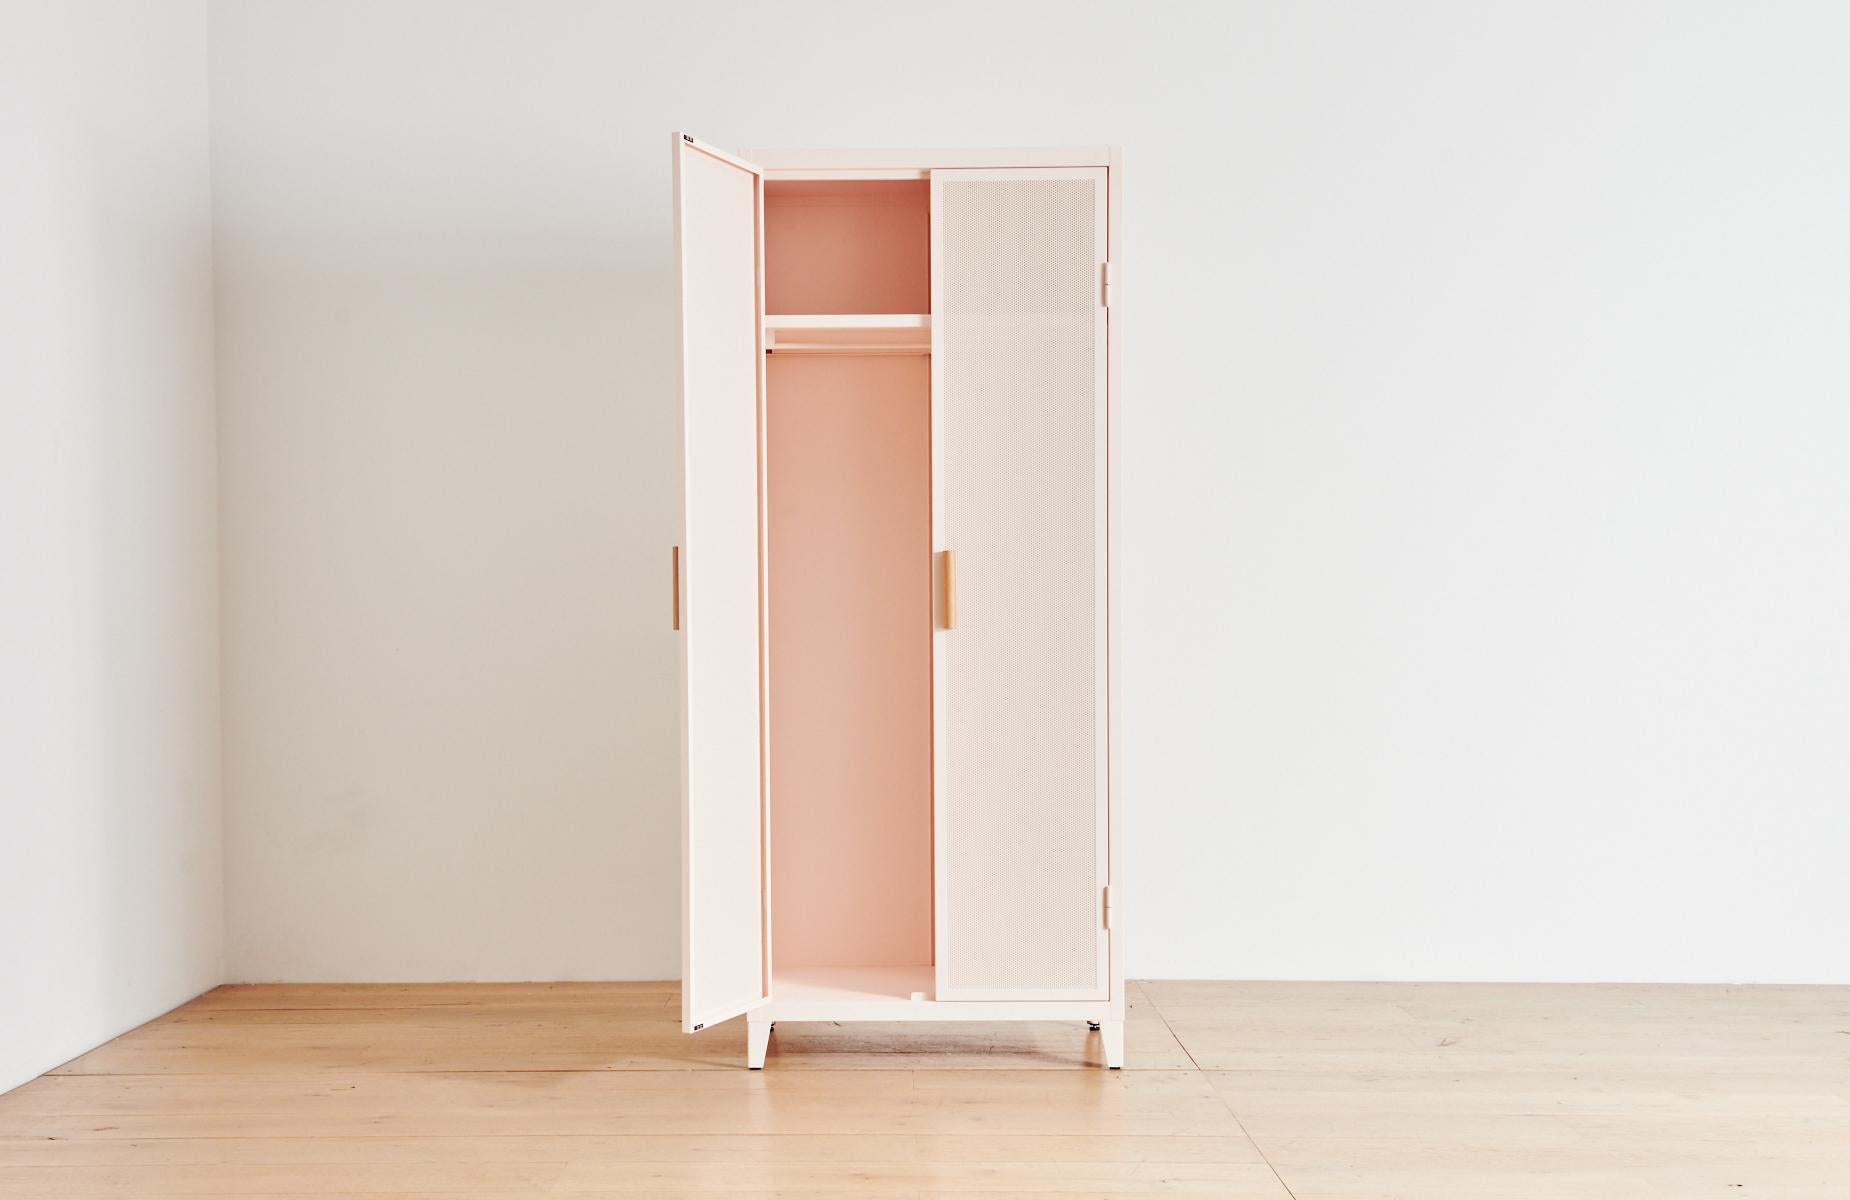 Tolix’s Perforated Collection breathes new life into their steel offerings. This sculptural armoire is thoughtfully appointed with a shelf and wardrobe for neatly storing clothing, linens, books and other personal belongings. We think it works as